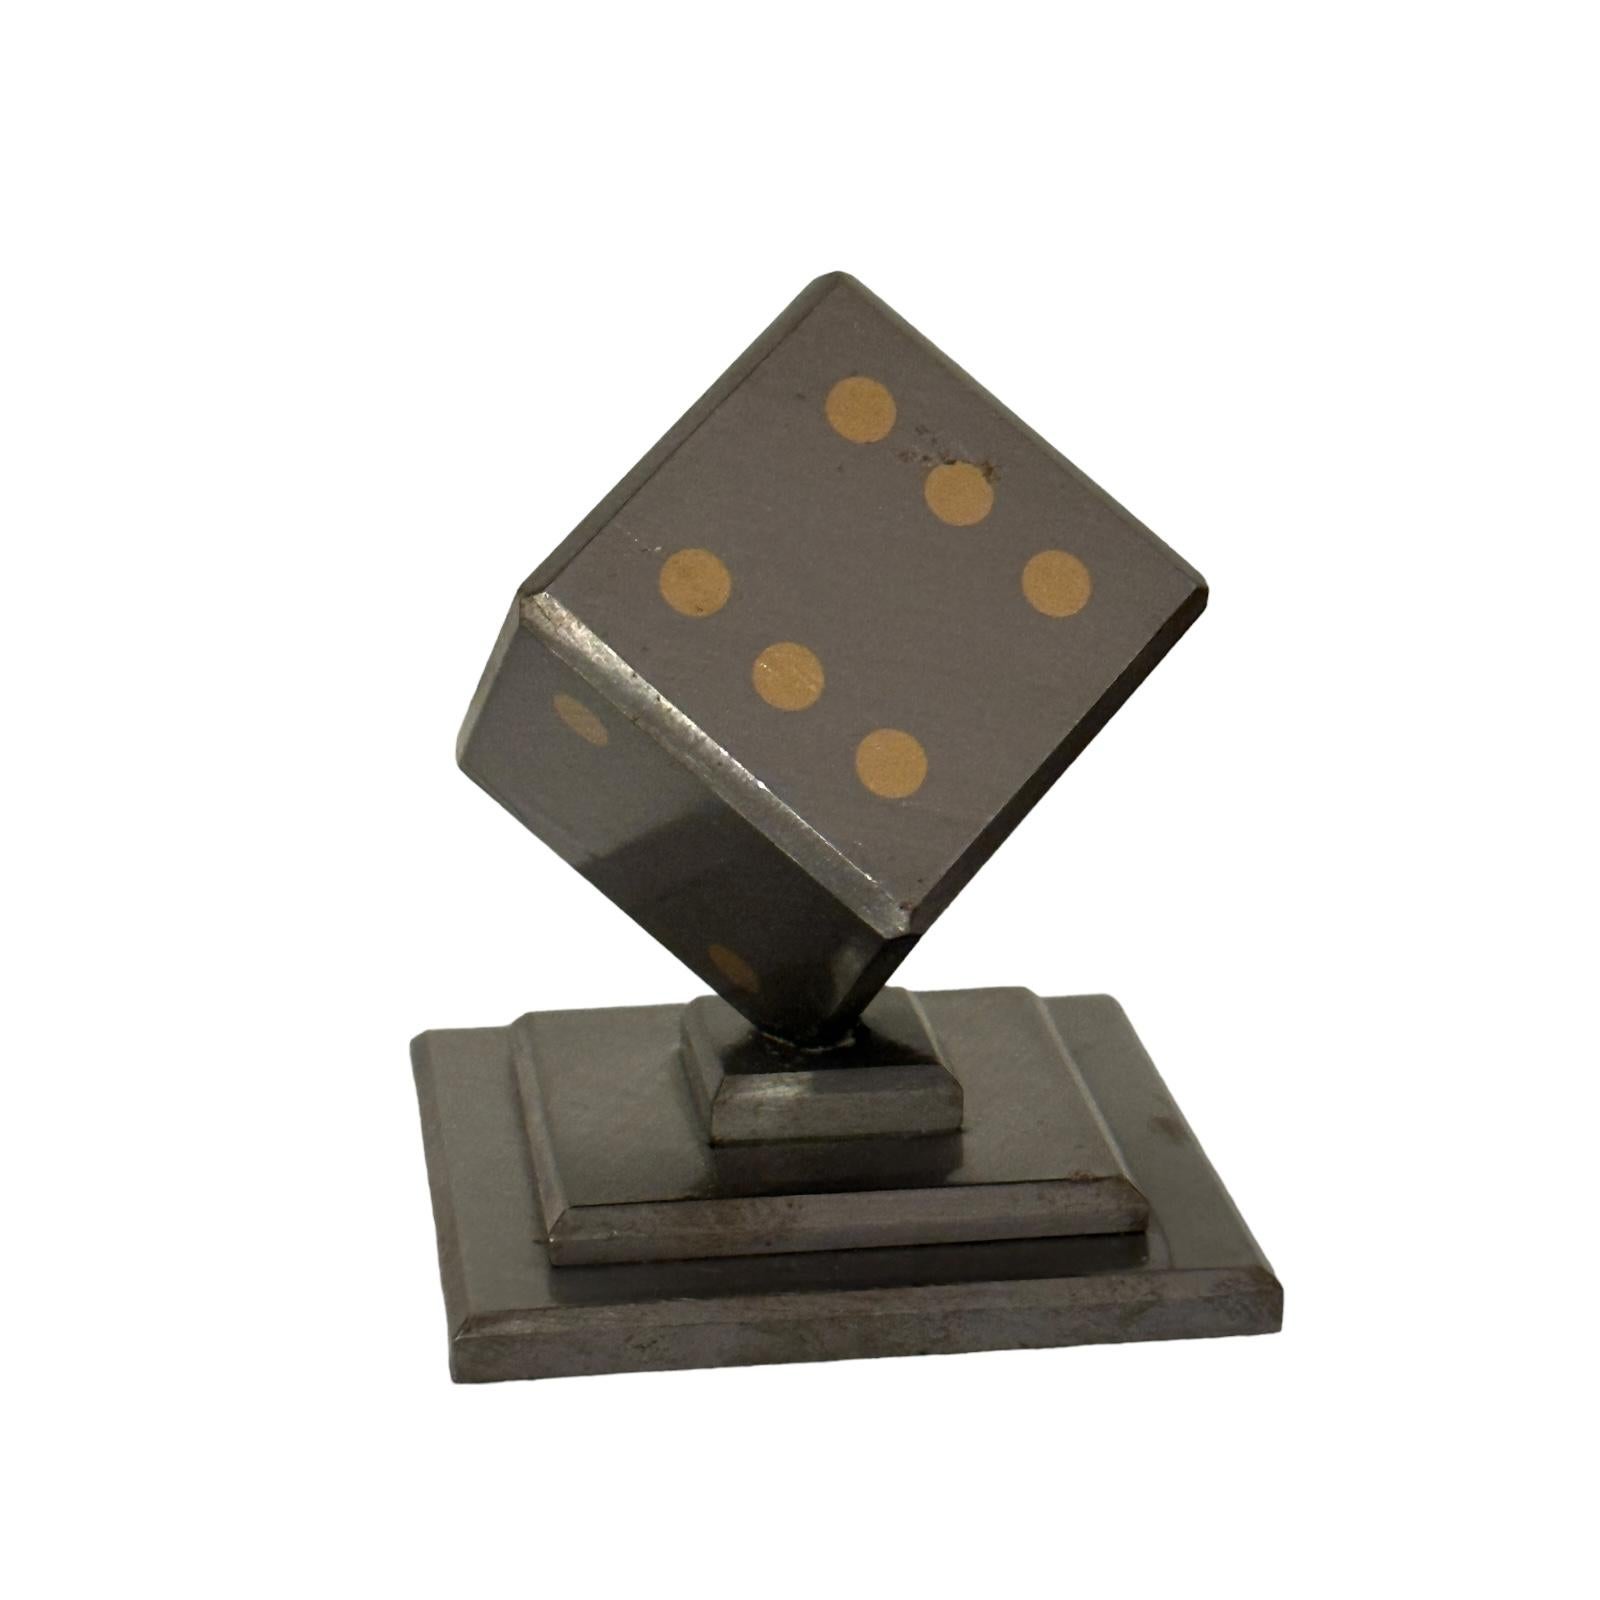 Hand-Crafted Dice Metal Statue Paper Weight Mid-Century Modern, German, 1970s For Sale